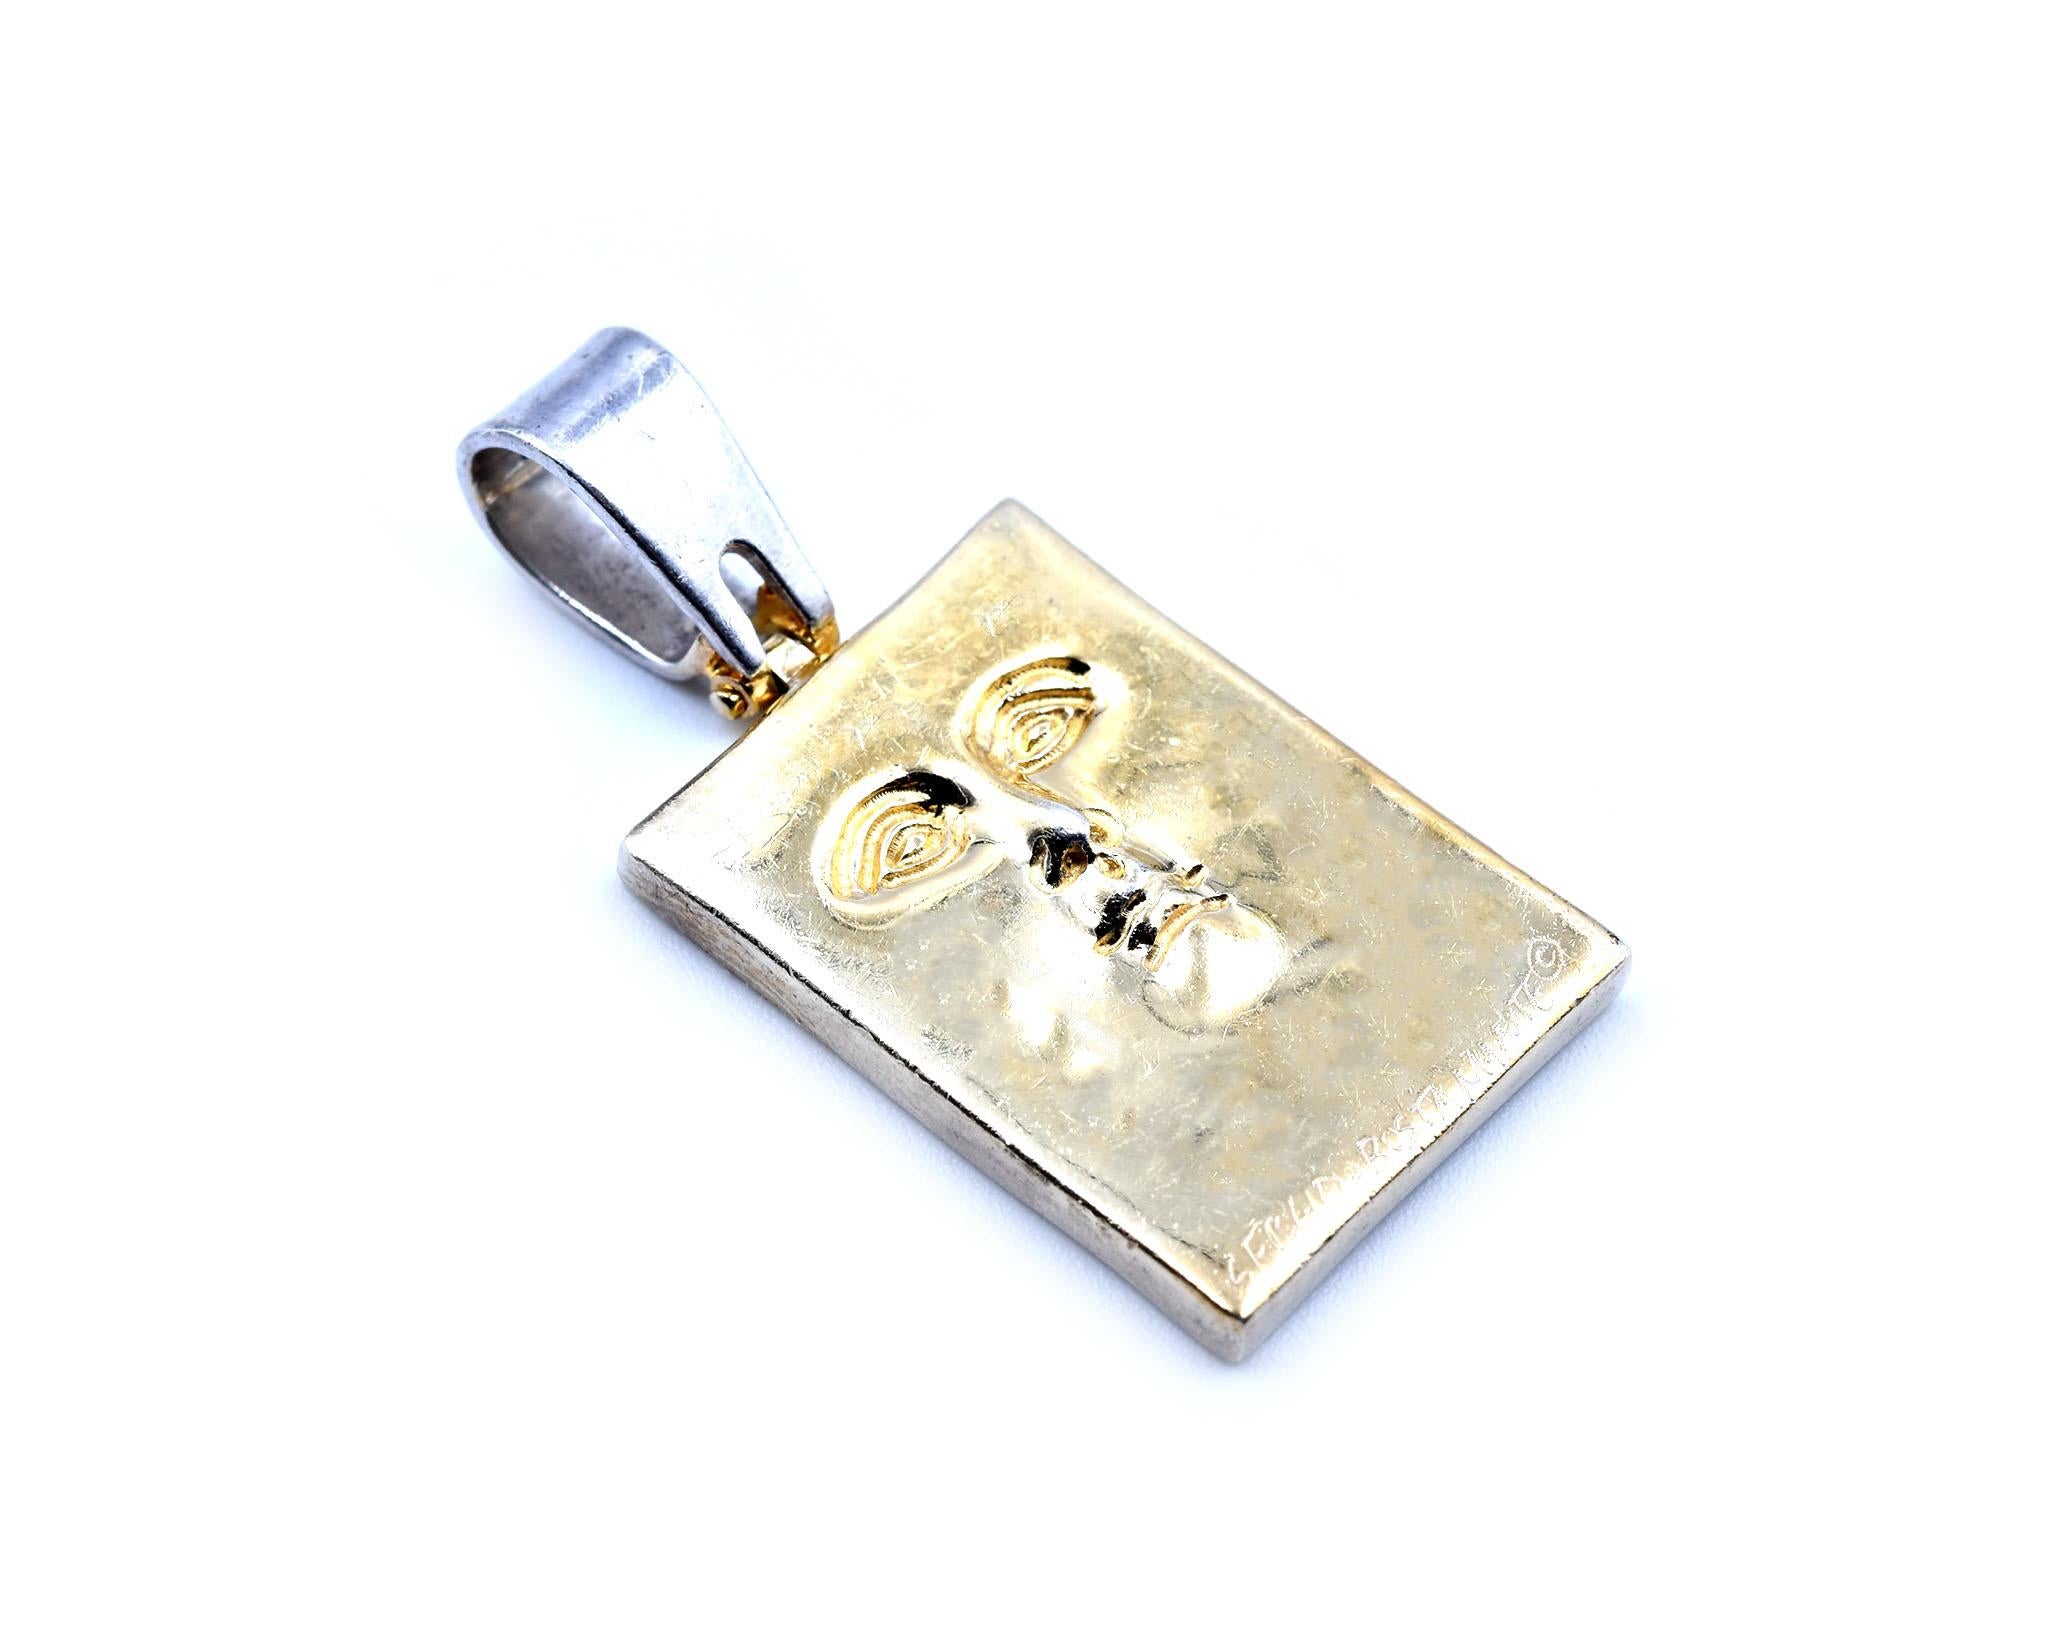 Designer: Sergio Bustamante
Material: sterling silver
Dimensions: pendant measures 18mm by 24mm	
Weight: 7.37 grams